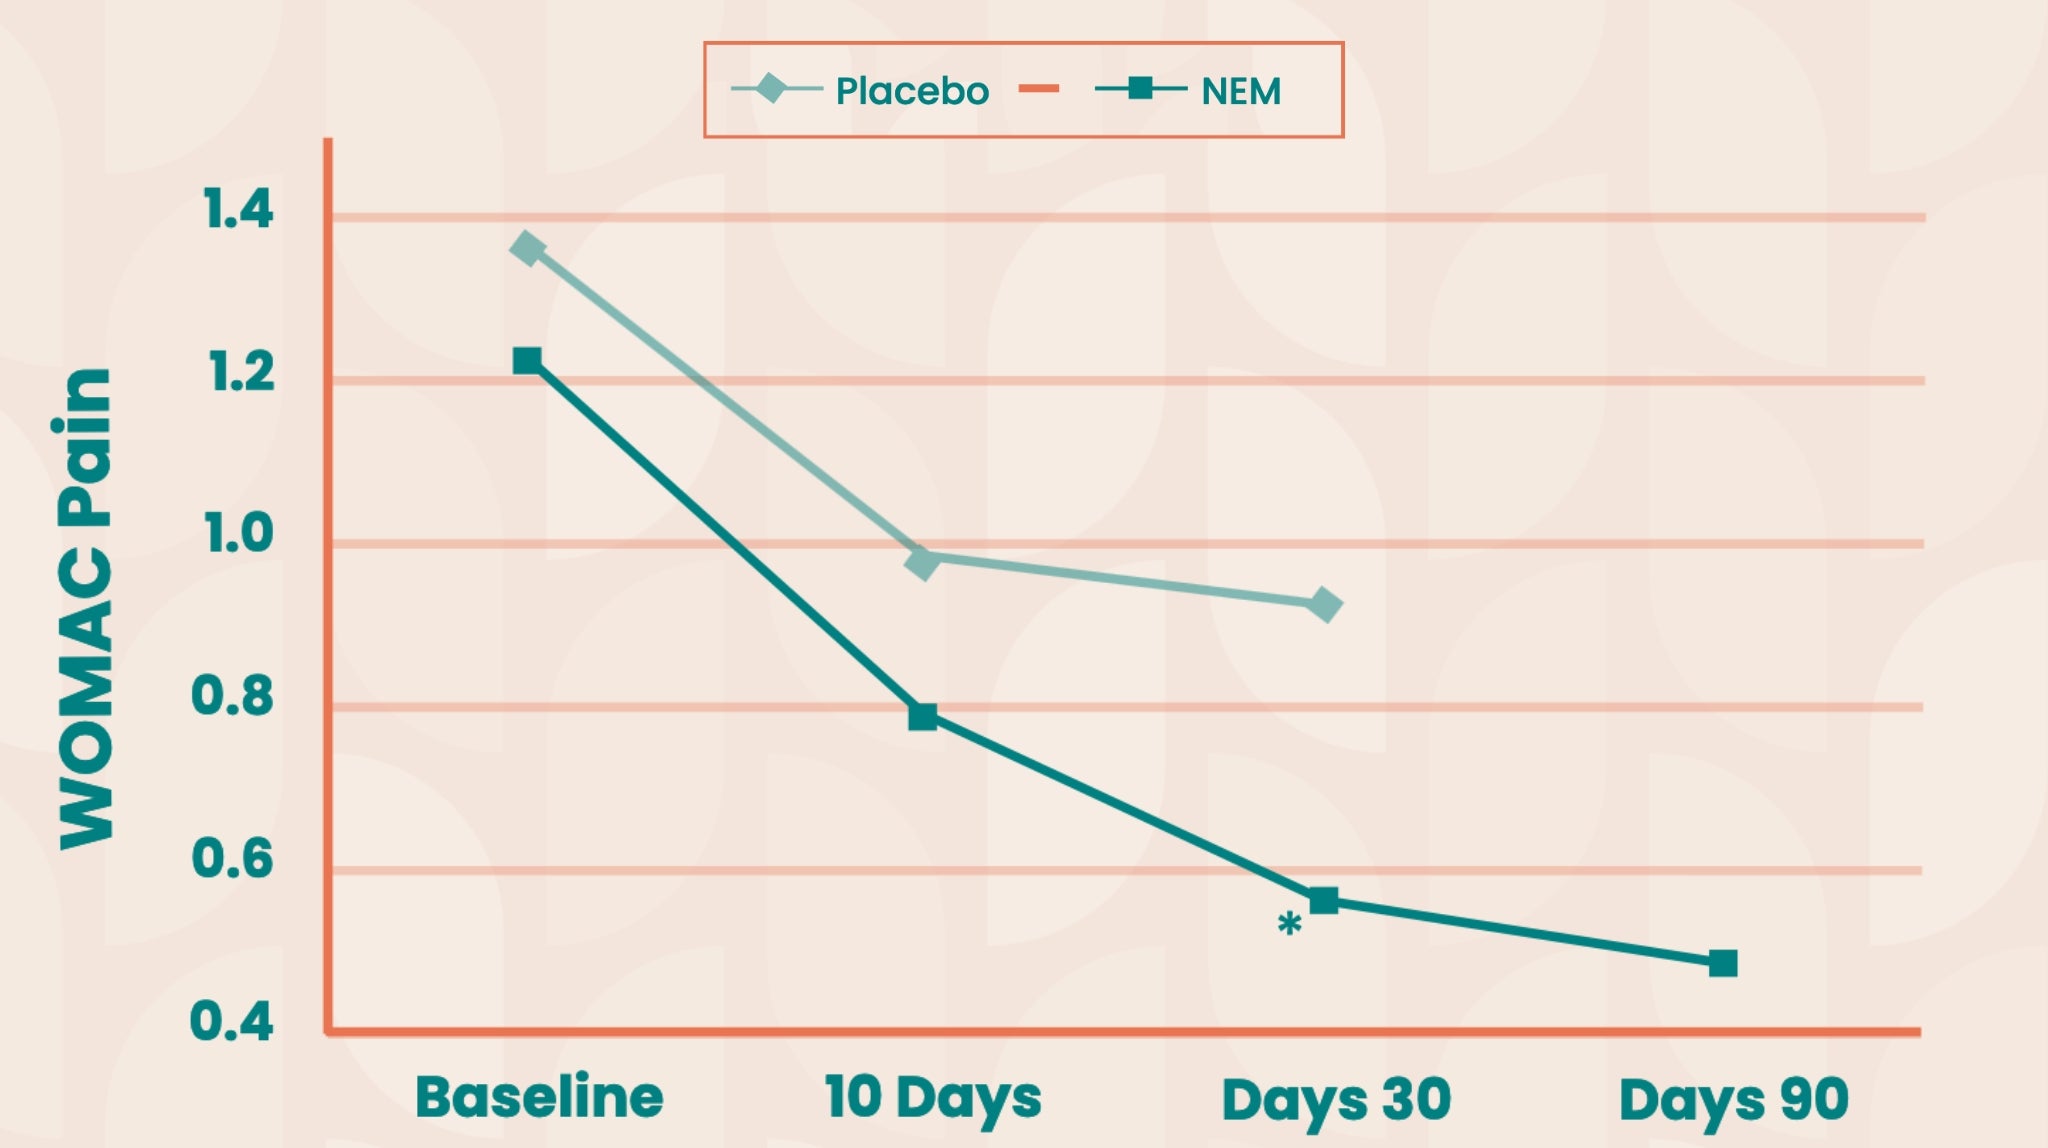 Line graph comparing WOMAC pain scores between Placebo and NEM over 90 days.